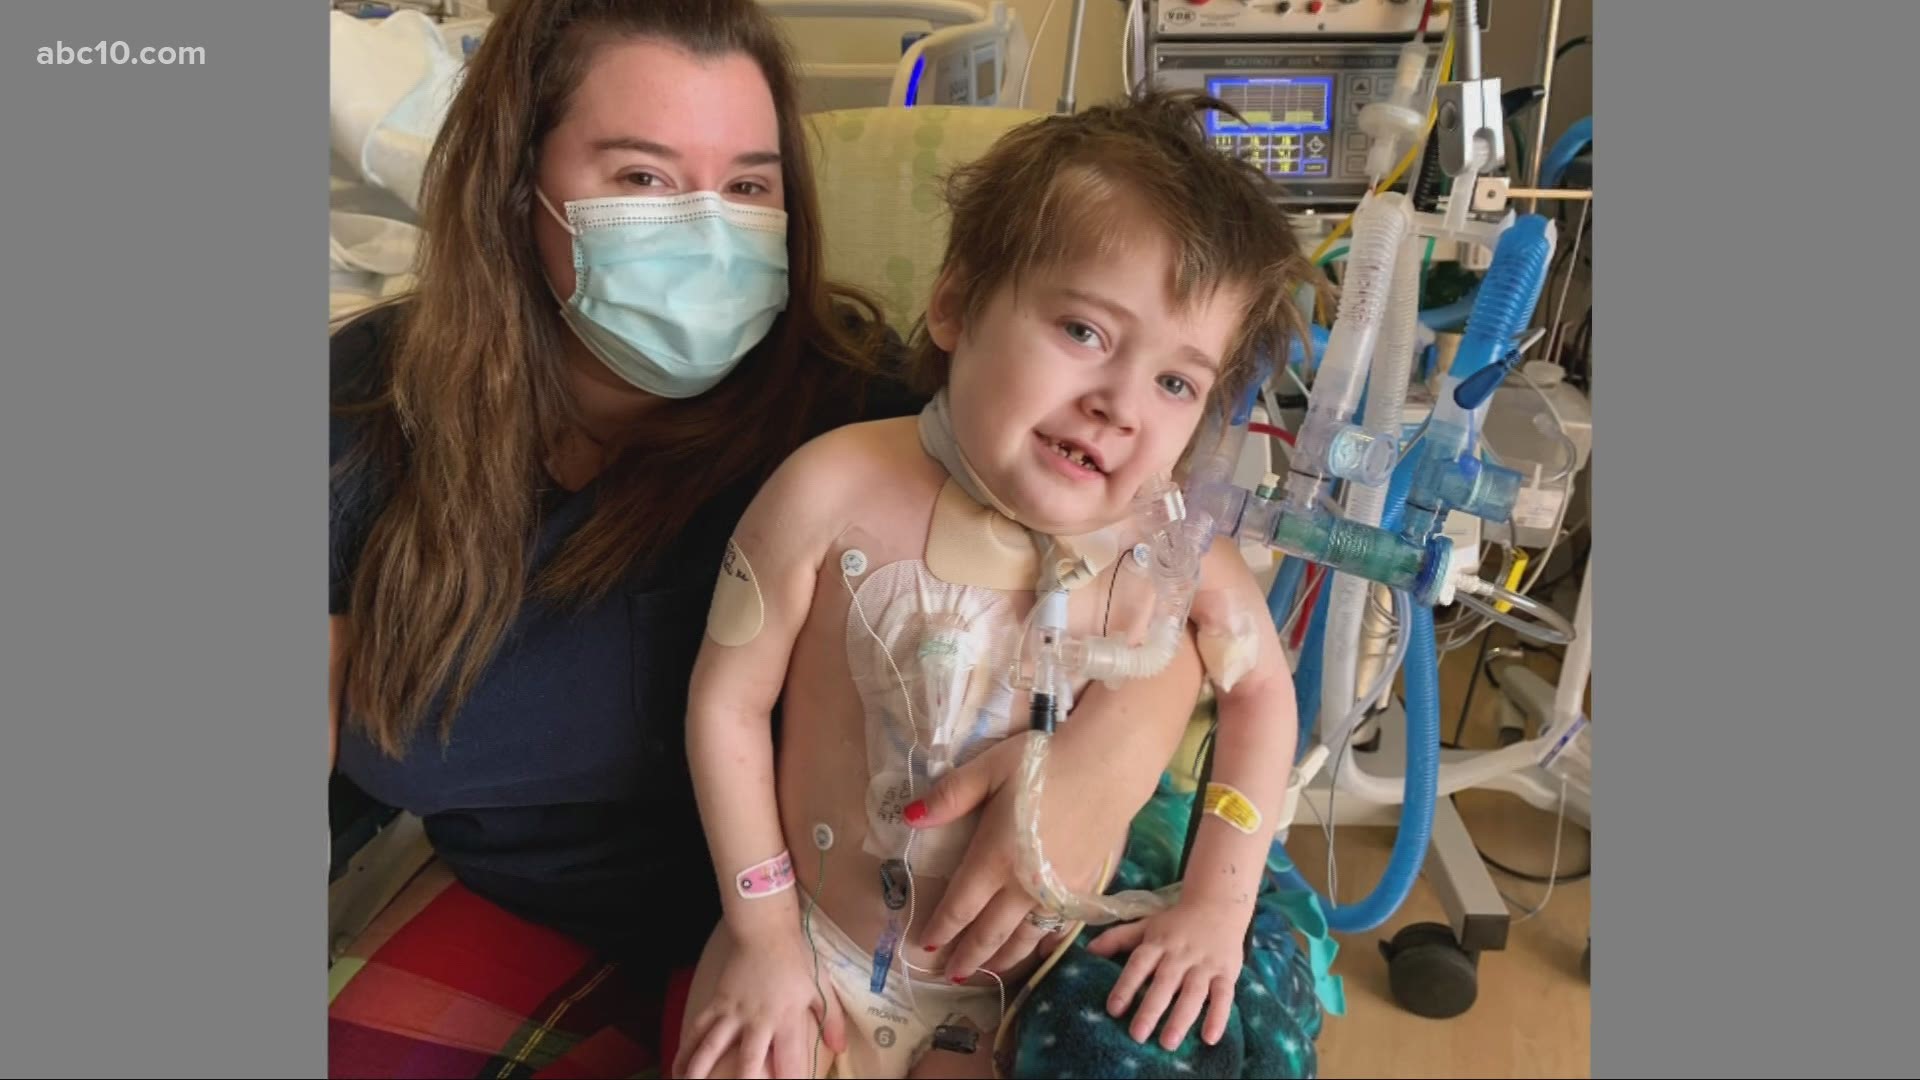 5-year-old Noah Schneider left Sutter Medical Center Children's Center after battling COVID-19 while living with Cystic Fibrosis. He was in the hospital for 60 days